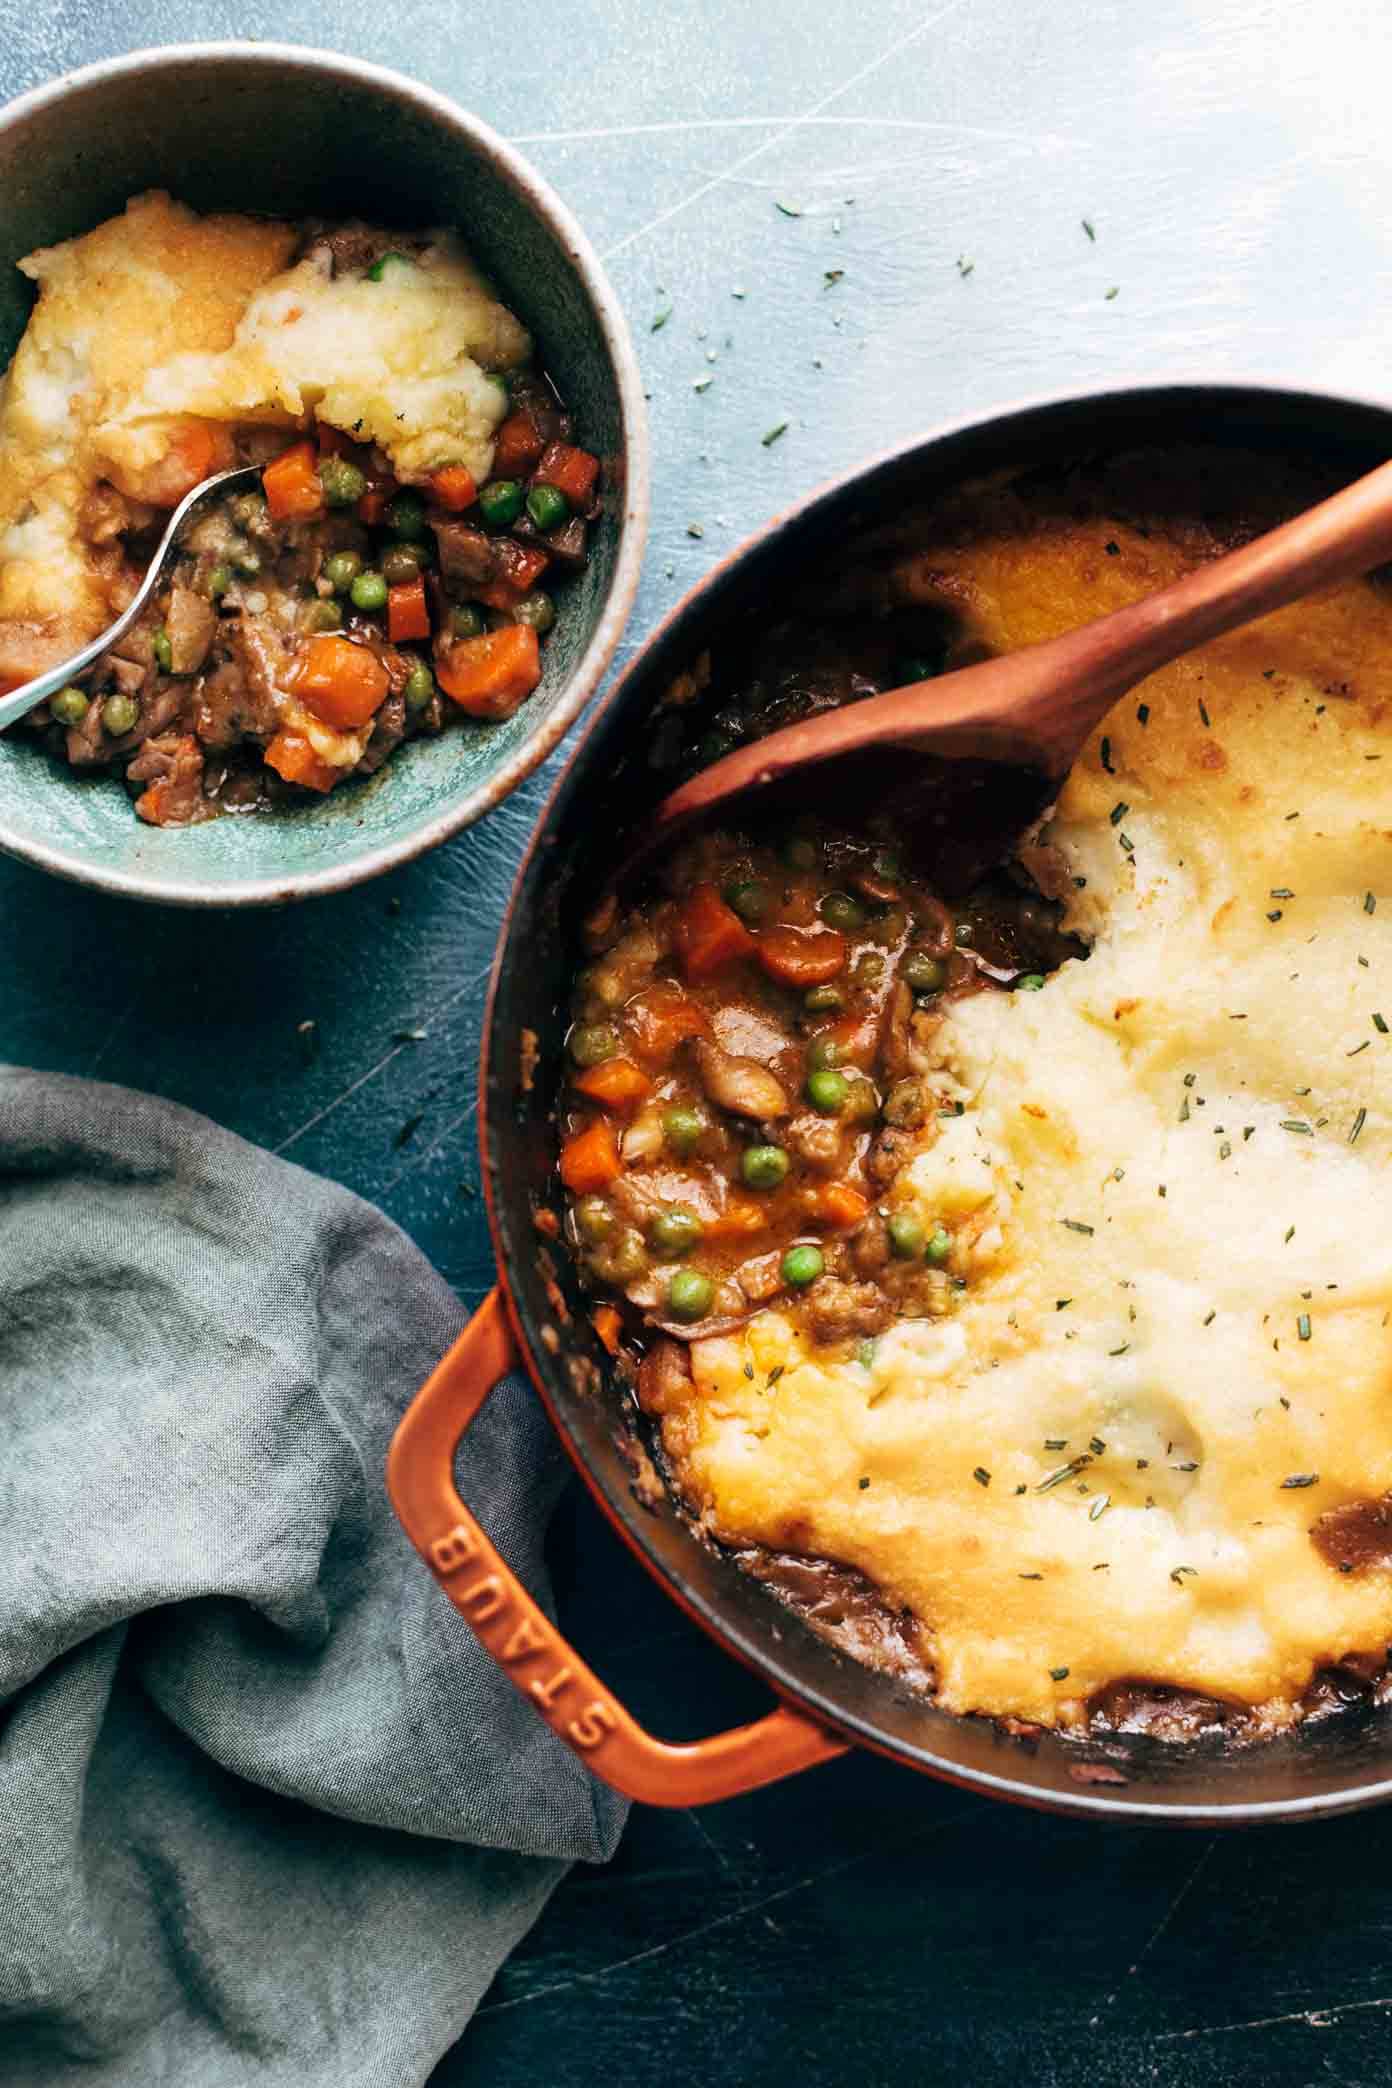 Vegetarian shepherd's pie in a pot with a wooden spoon. There's a bowl of shepherd's pie on the side.